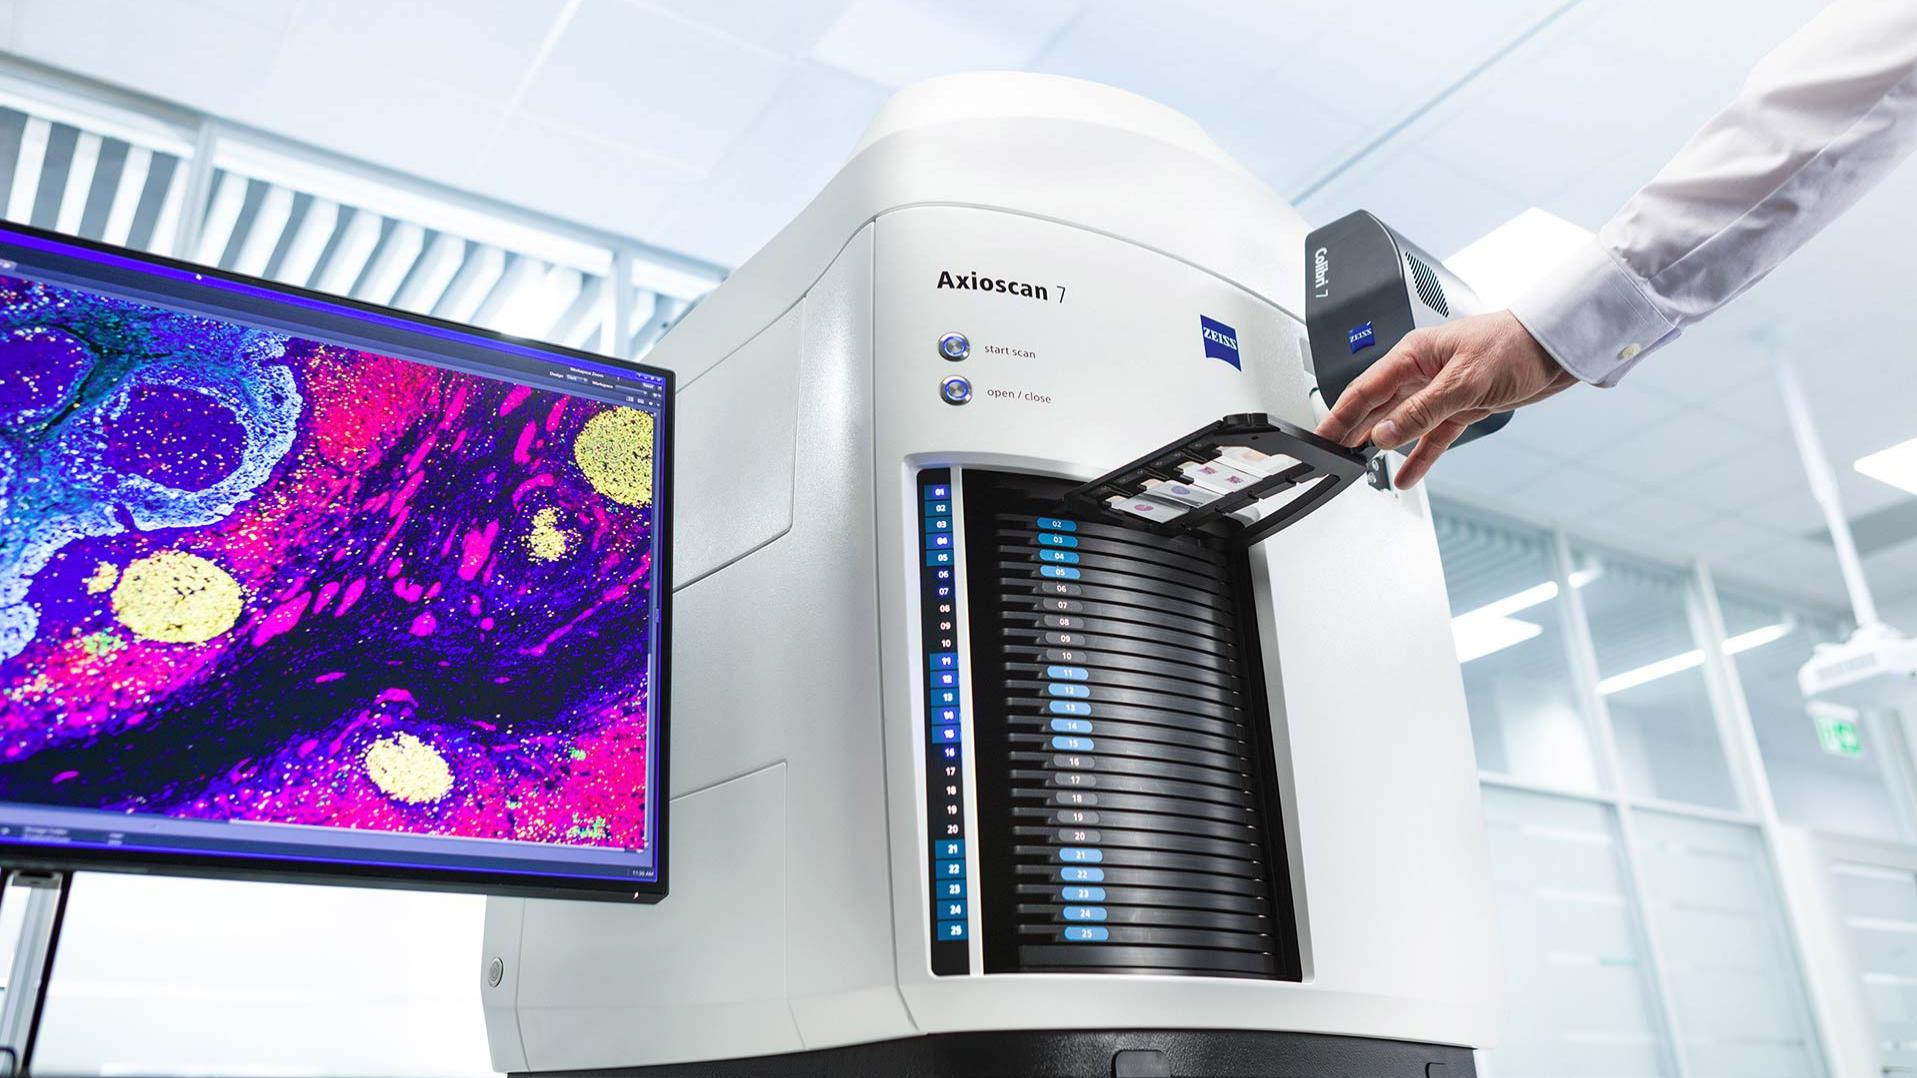 ZEISS Introduces New Microscopy Slide Scanner